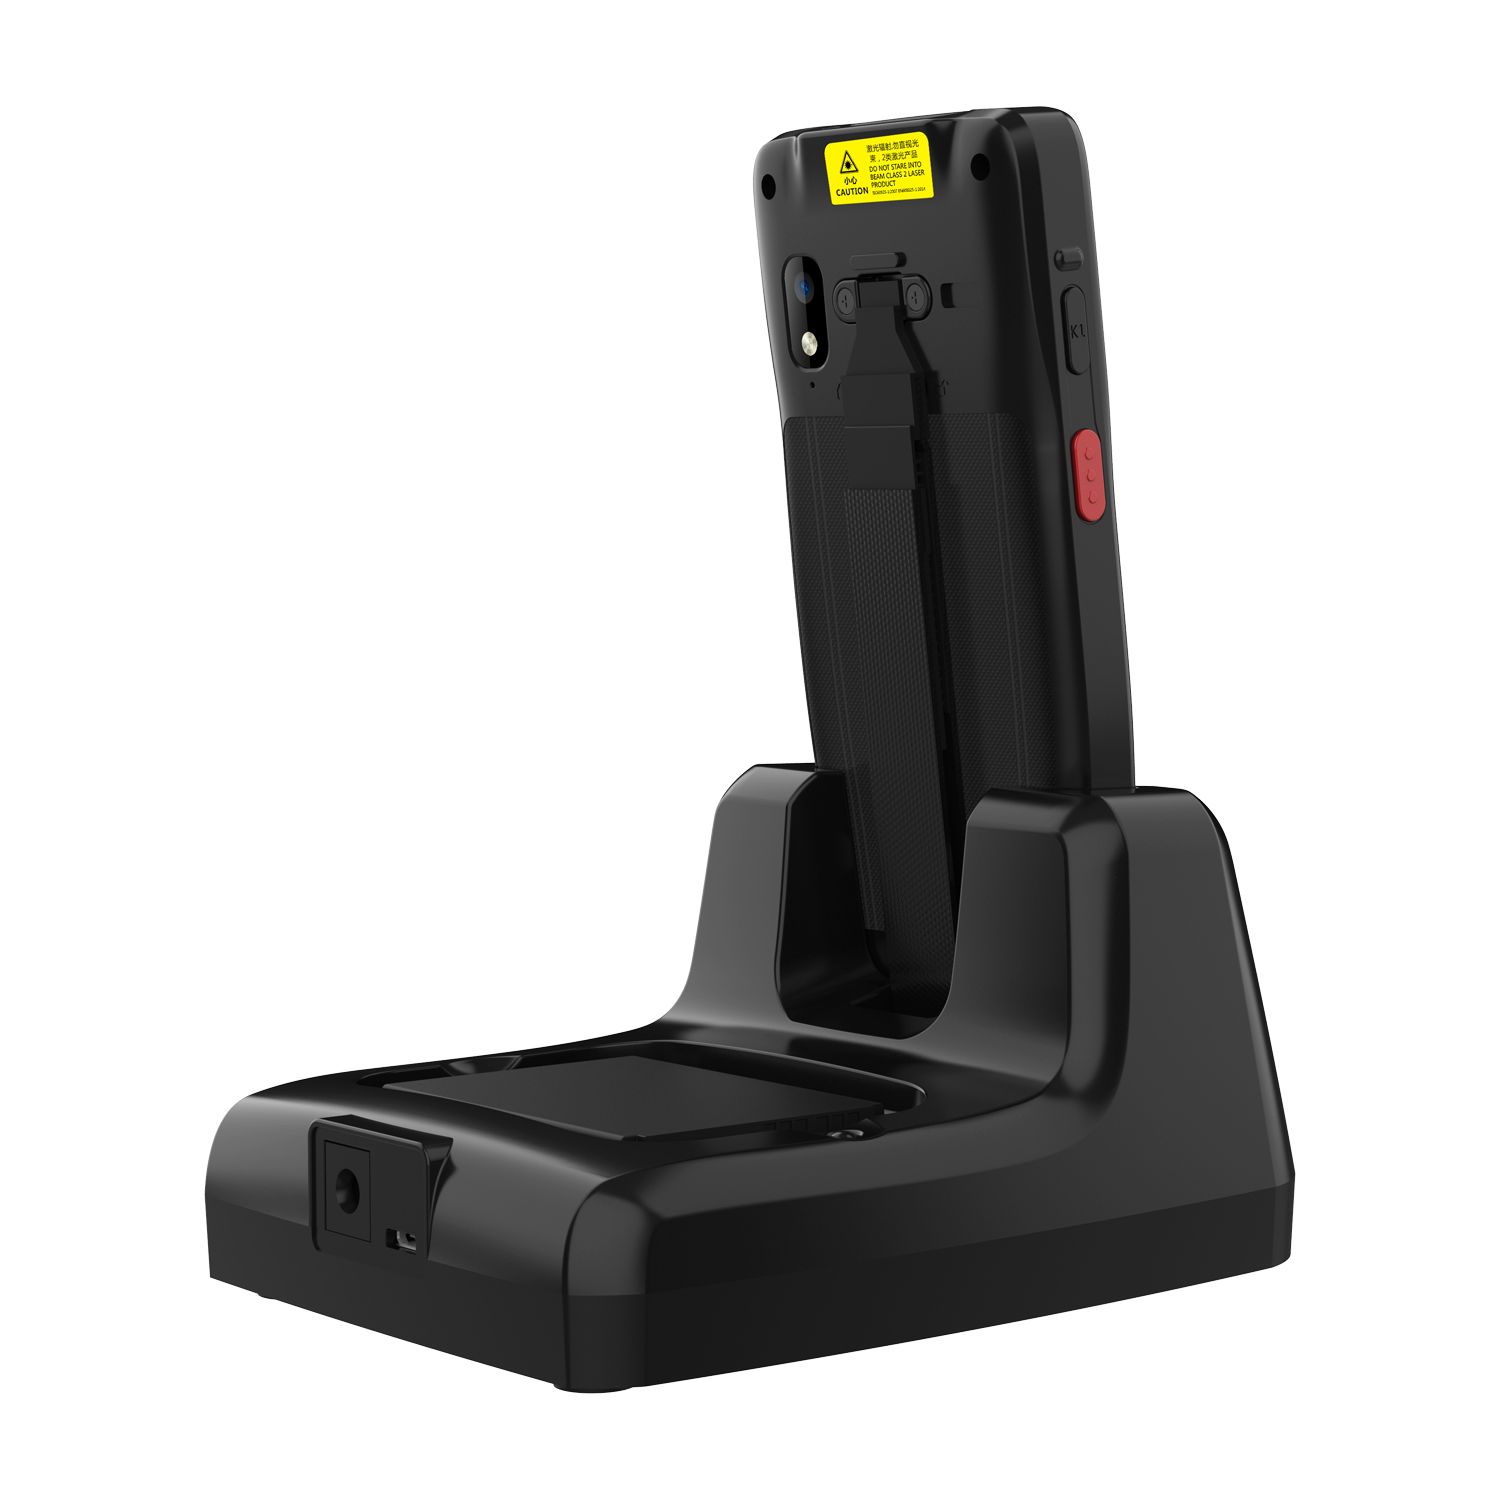 NETUM PDA-D7100, NT-M71 PDA Android Terminal 2D Barcode Scanner Touch Screen Android Terminal Device with WIFI 4G GPS